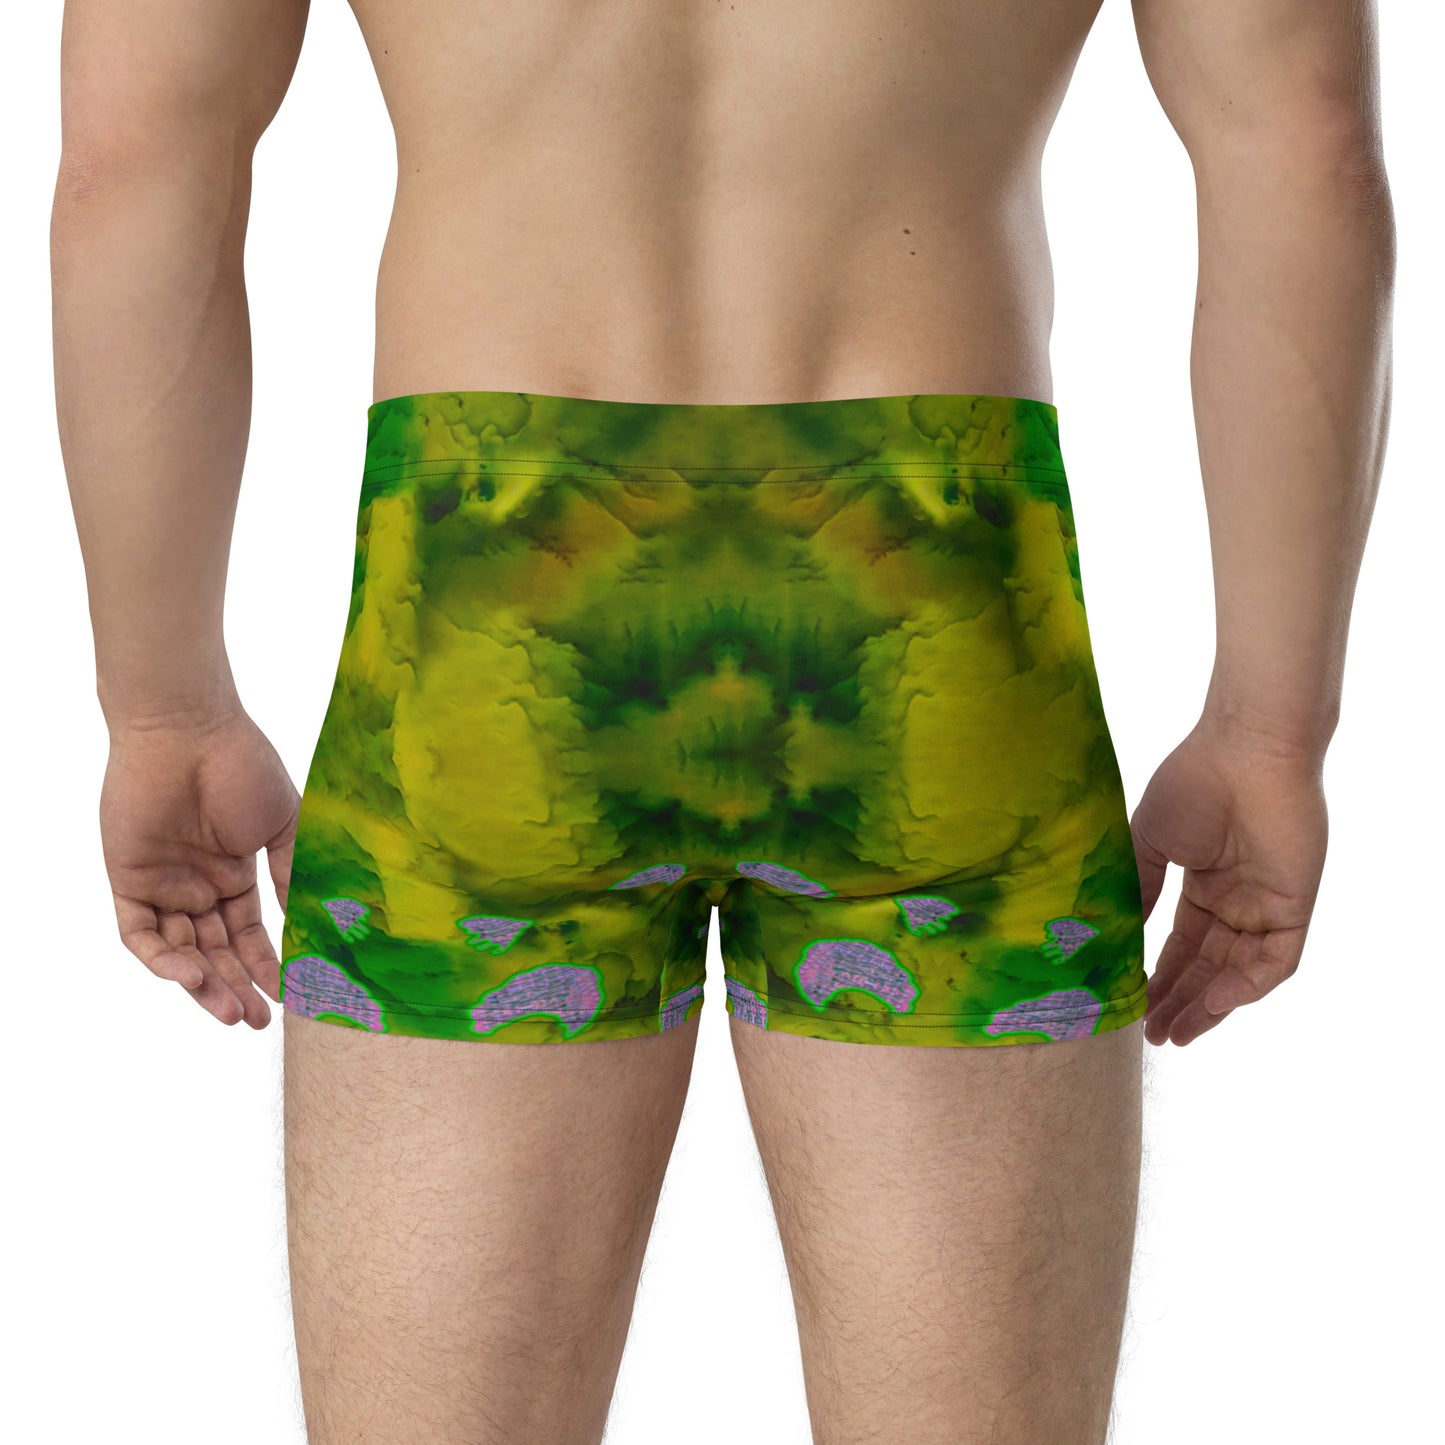 Boxer Briefs (His/They) RJSTH@Fabric#5 RJSTHW2020 RJS